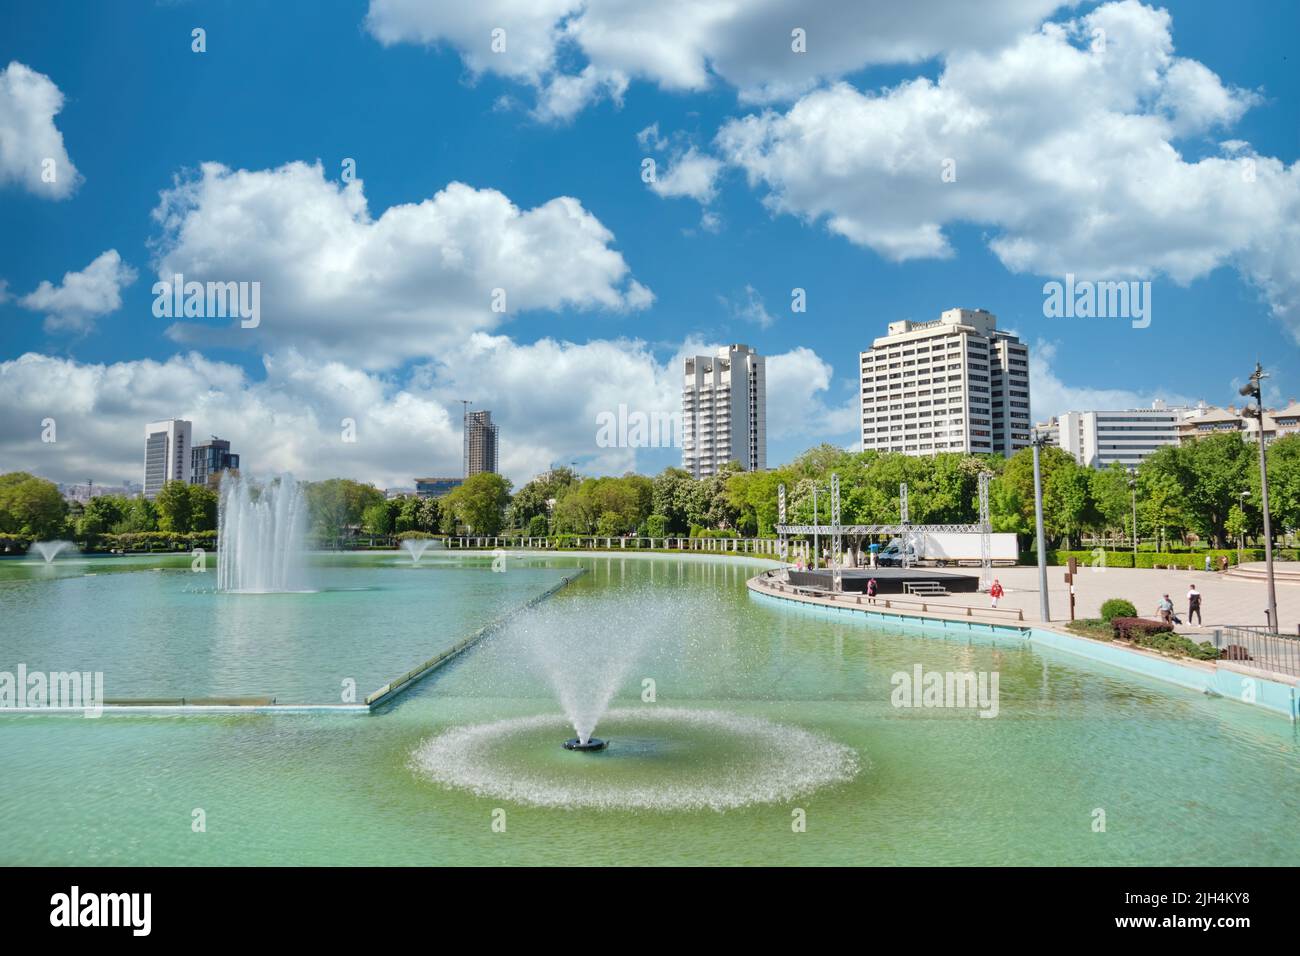 View from the pond at Genclik Parki, a public park with cultural center, youths' center, theme park, convention halls at the center of Ankara, Turkey Stock Photo